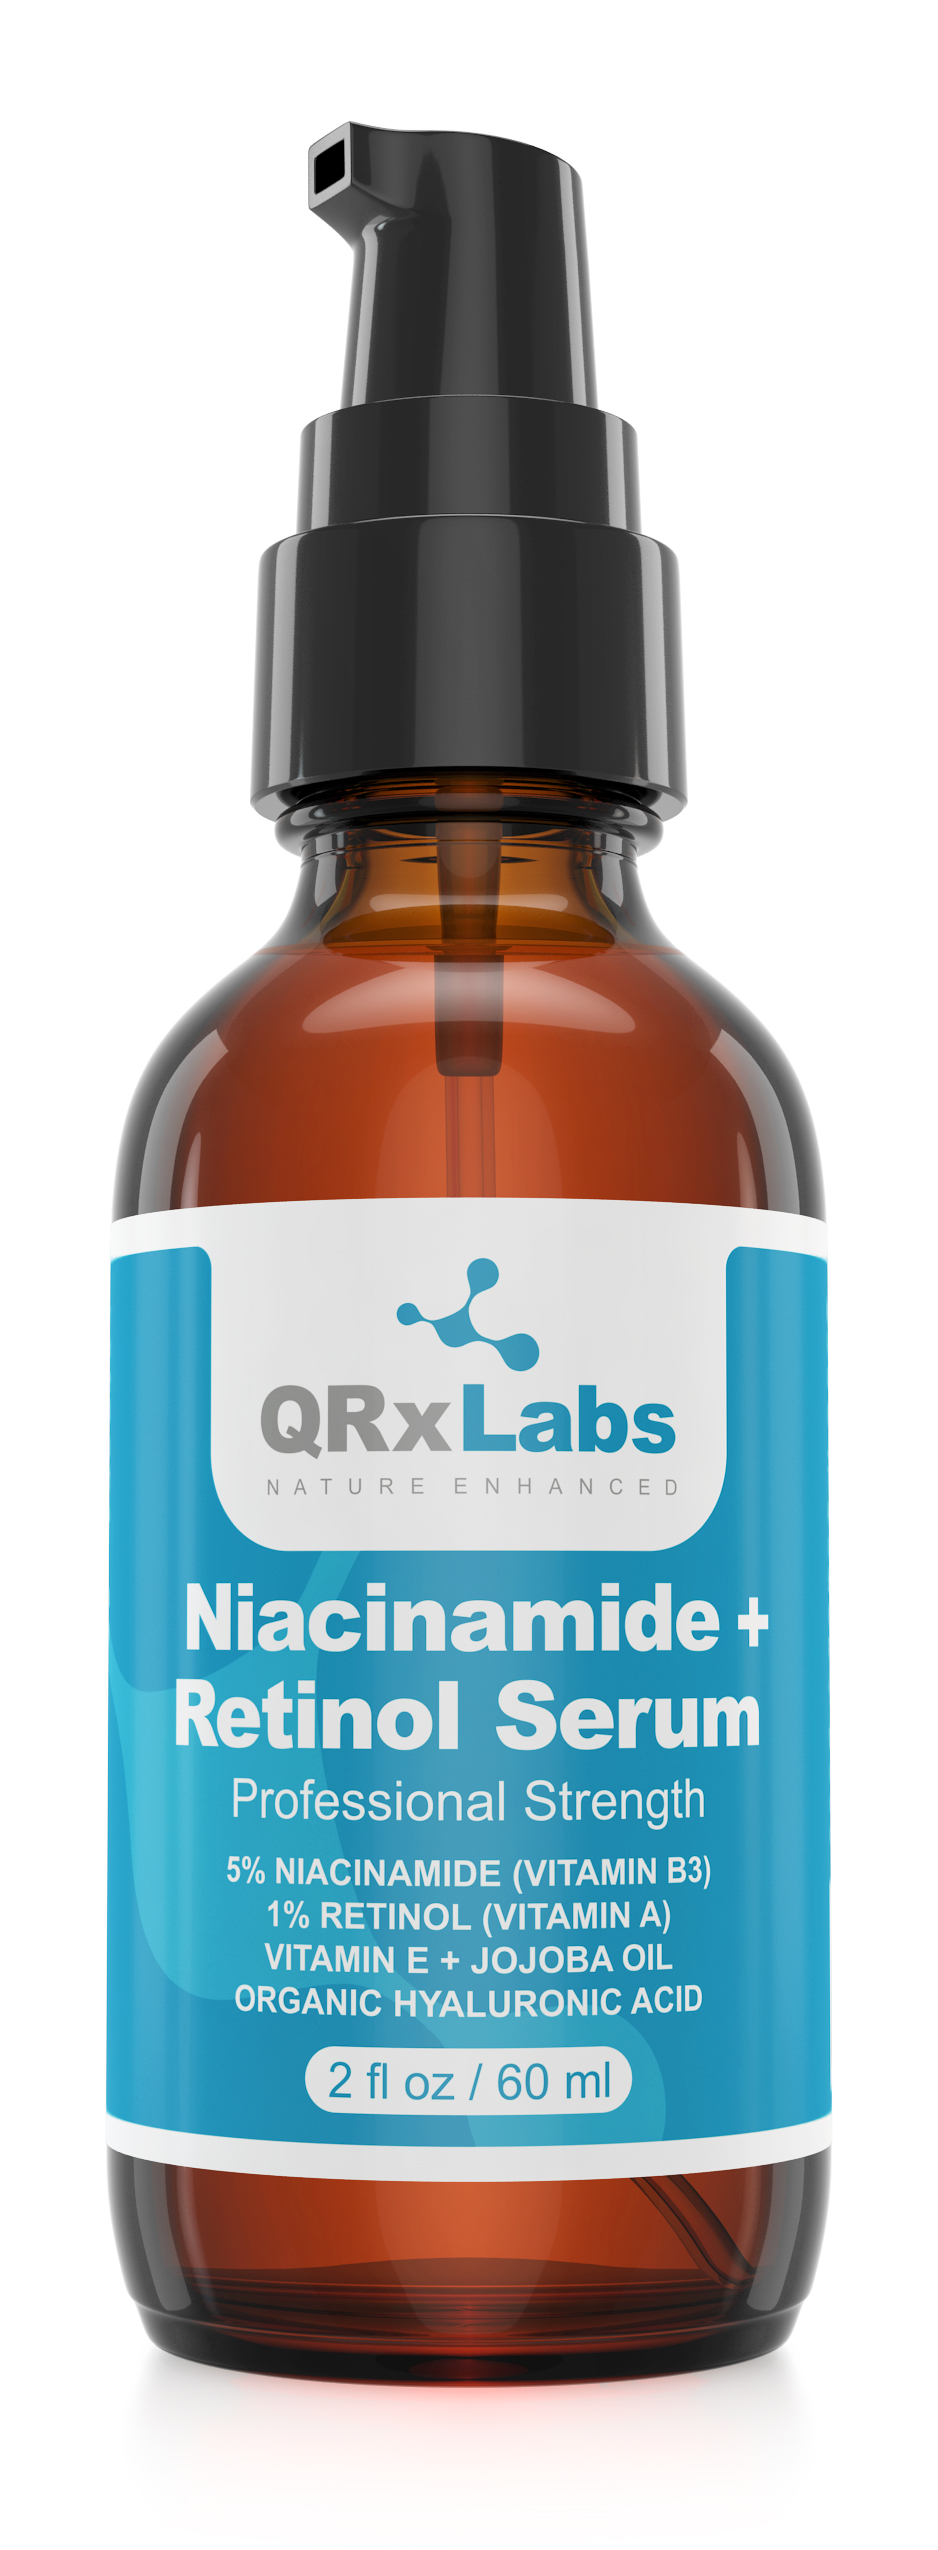 5% Niacinamide (Vitamin B3) + Retinol Serum (2 oz) - Ultimate Anti-Aging Wrinkle Reducing Treatment - Fights Acne Breakouts and Fades Blemishes & Spots - image 1 of 4